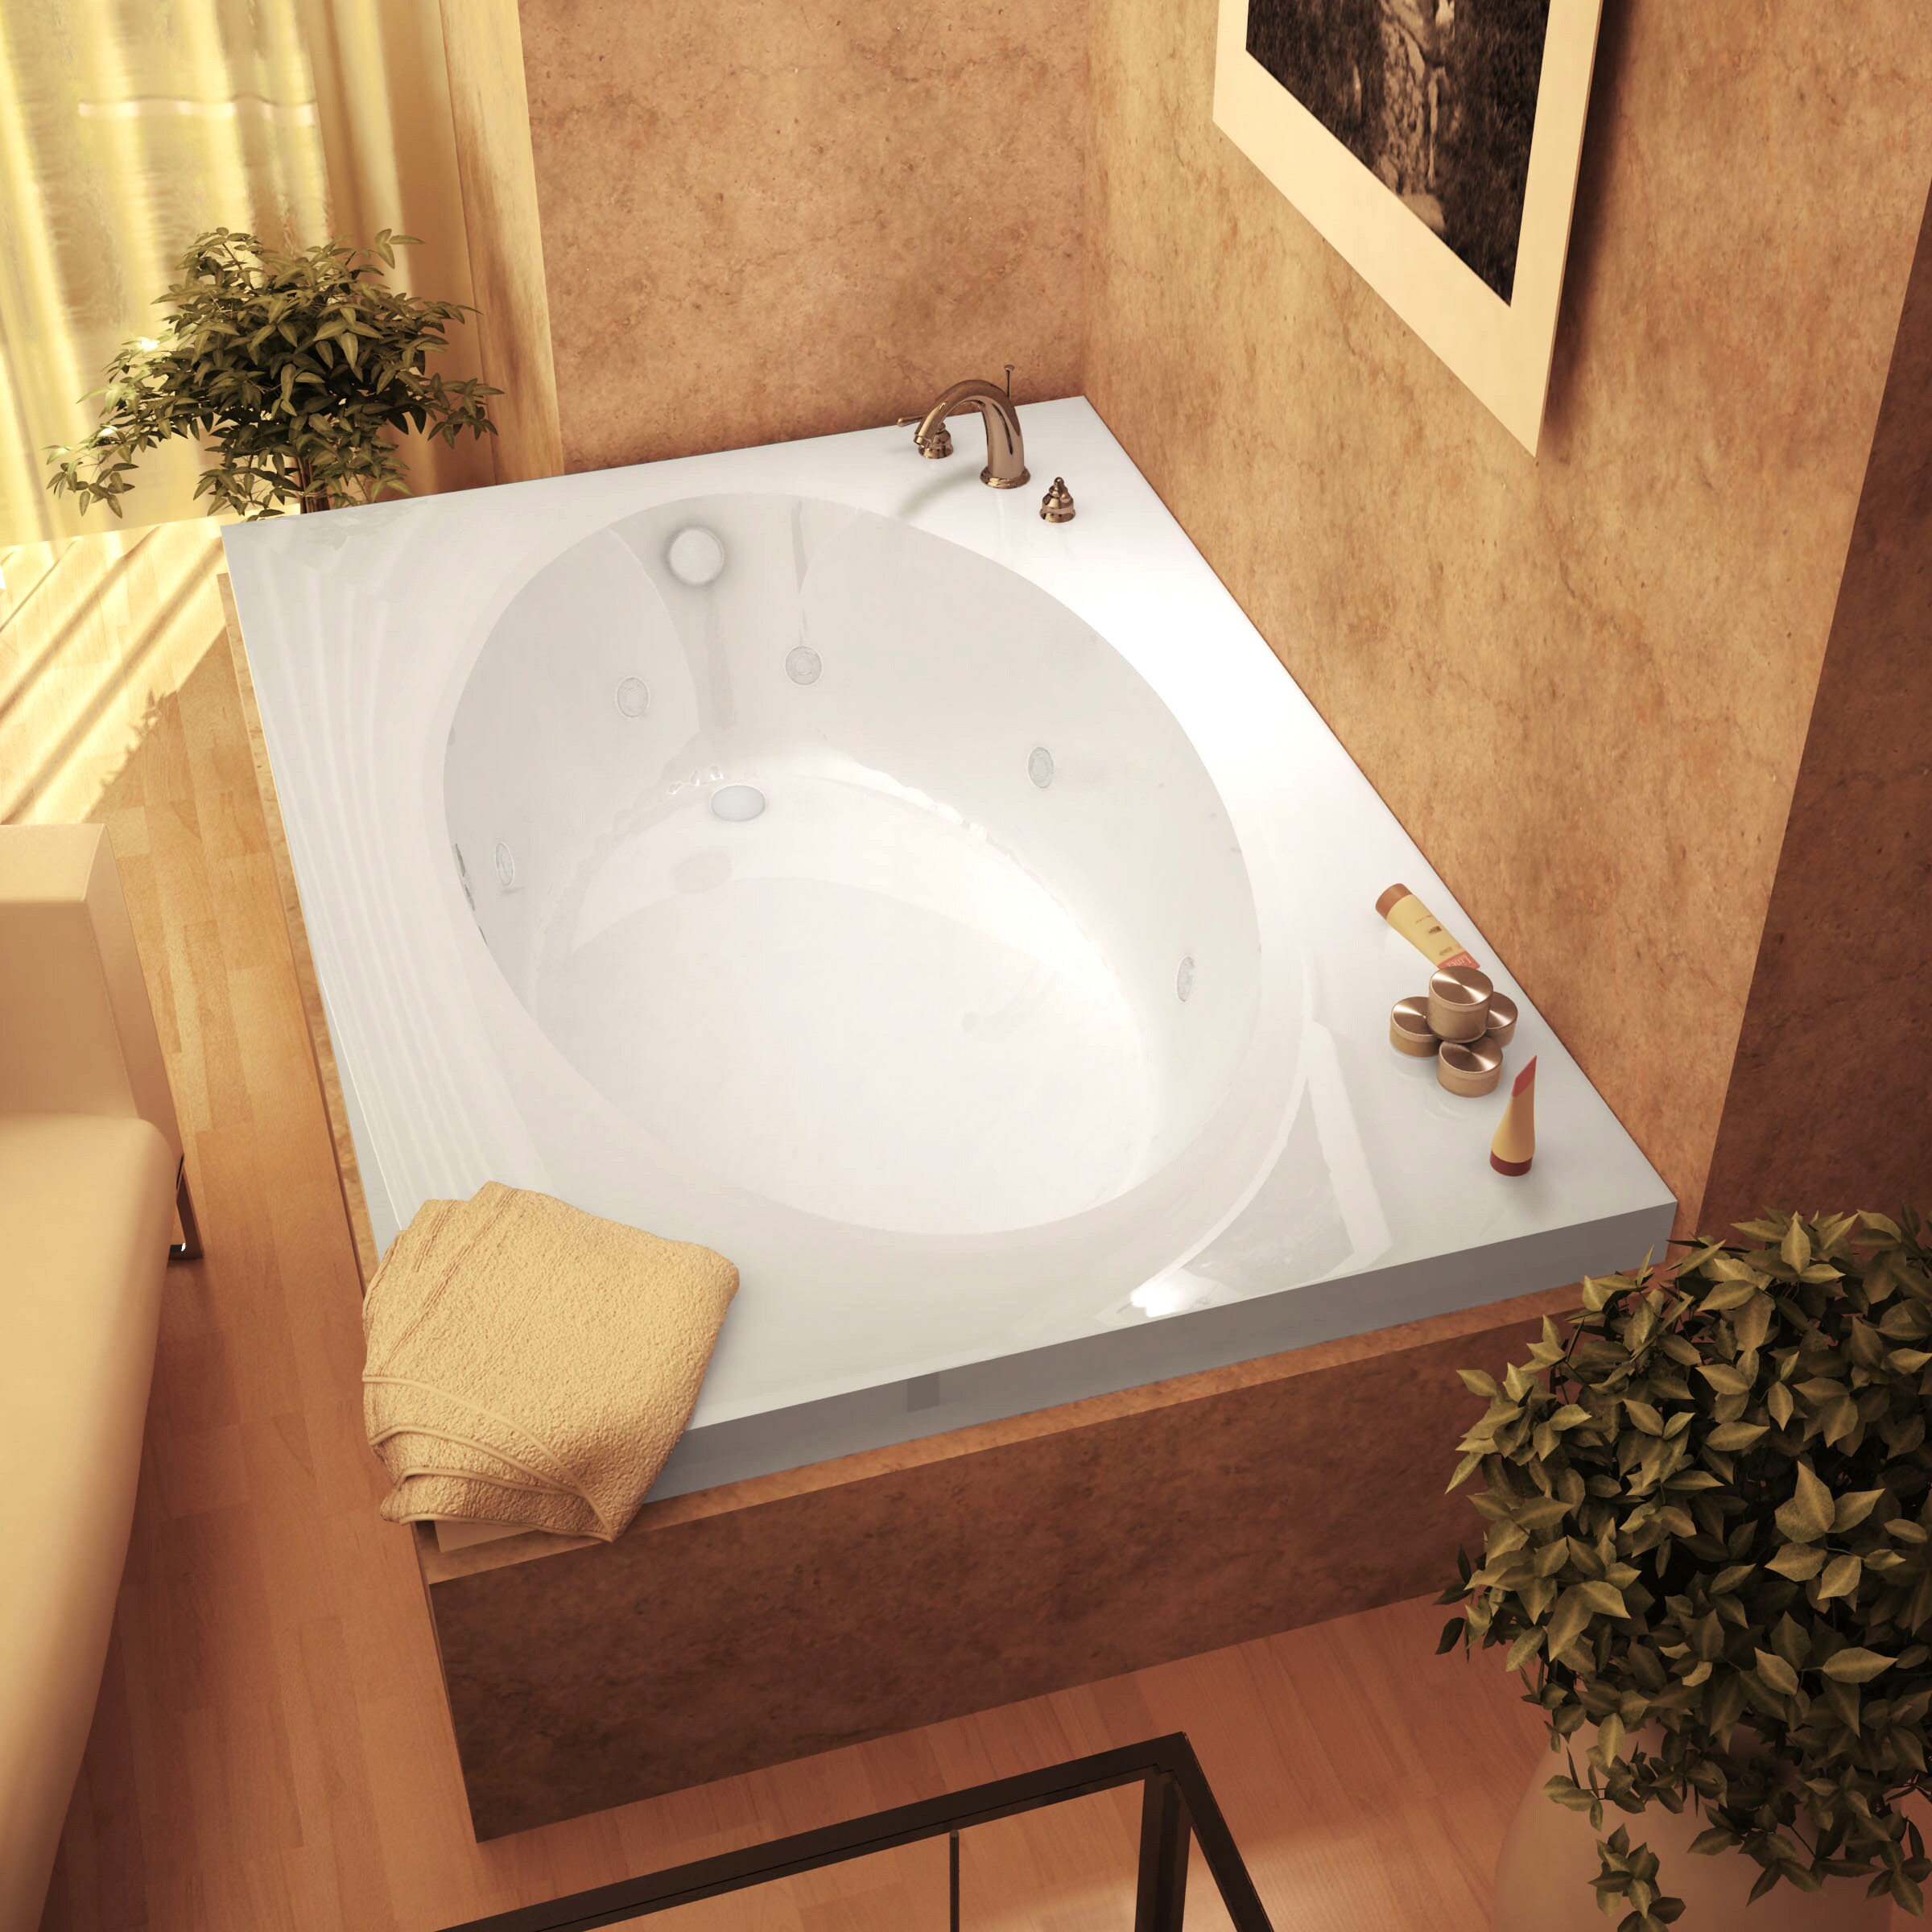 https://ak1.ostkcdn.com/images/products/8946985/Mountain-Home-Vail-42x72-inch-Acrylic-Whirlpool-Jetted-Drop-in-Bathtub-1016f594-dd40-4bd3-be5b-9722bc8be2e8.jpg